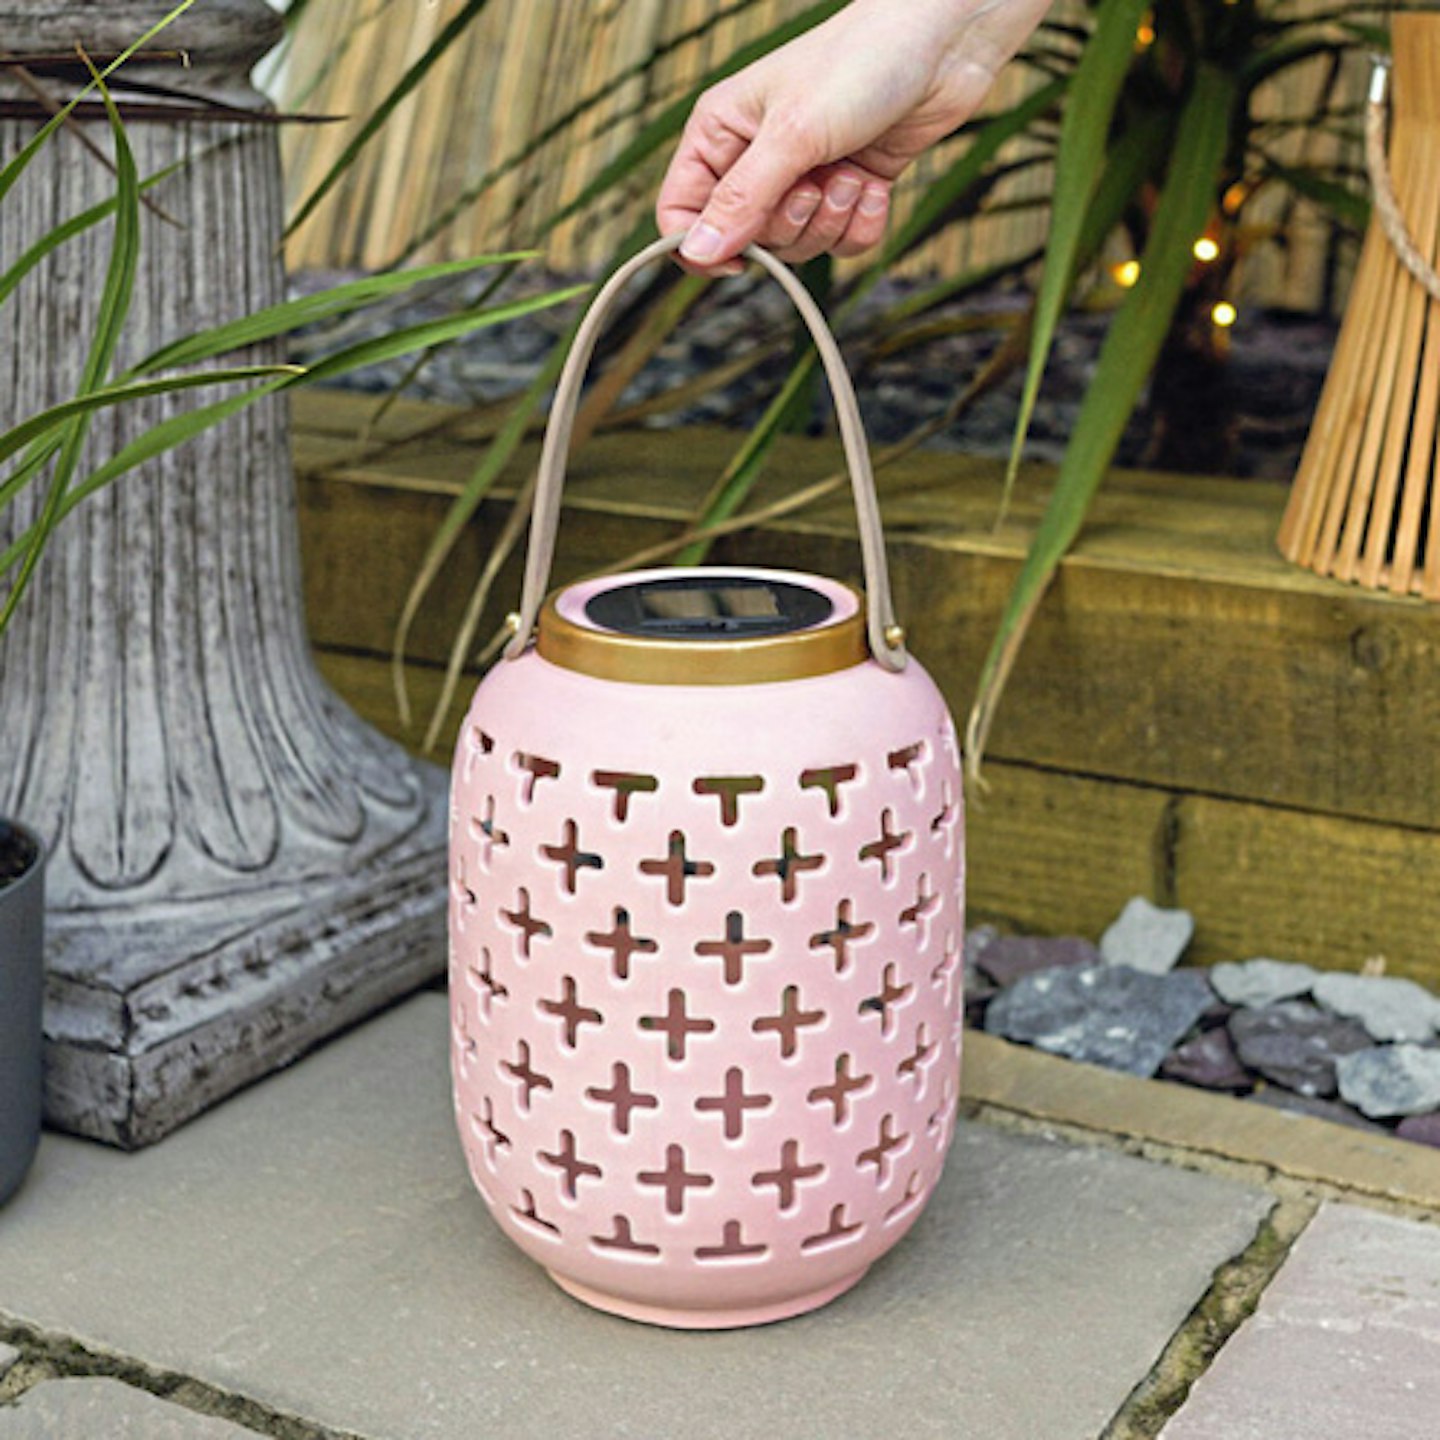 solar pink lantern being placed on patio